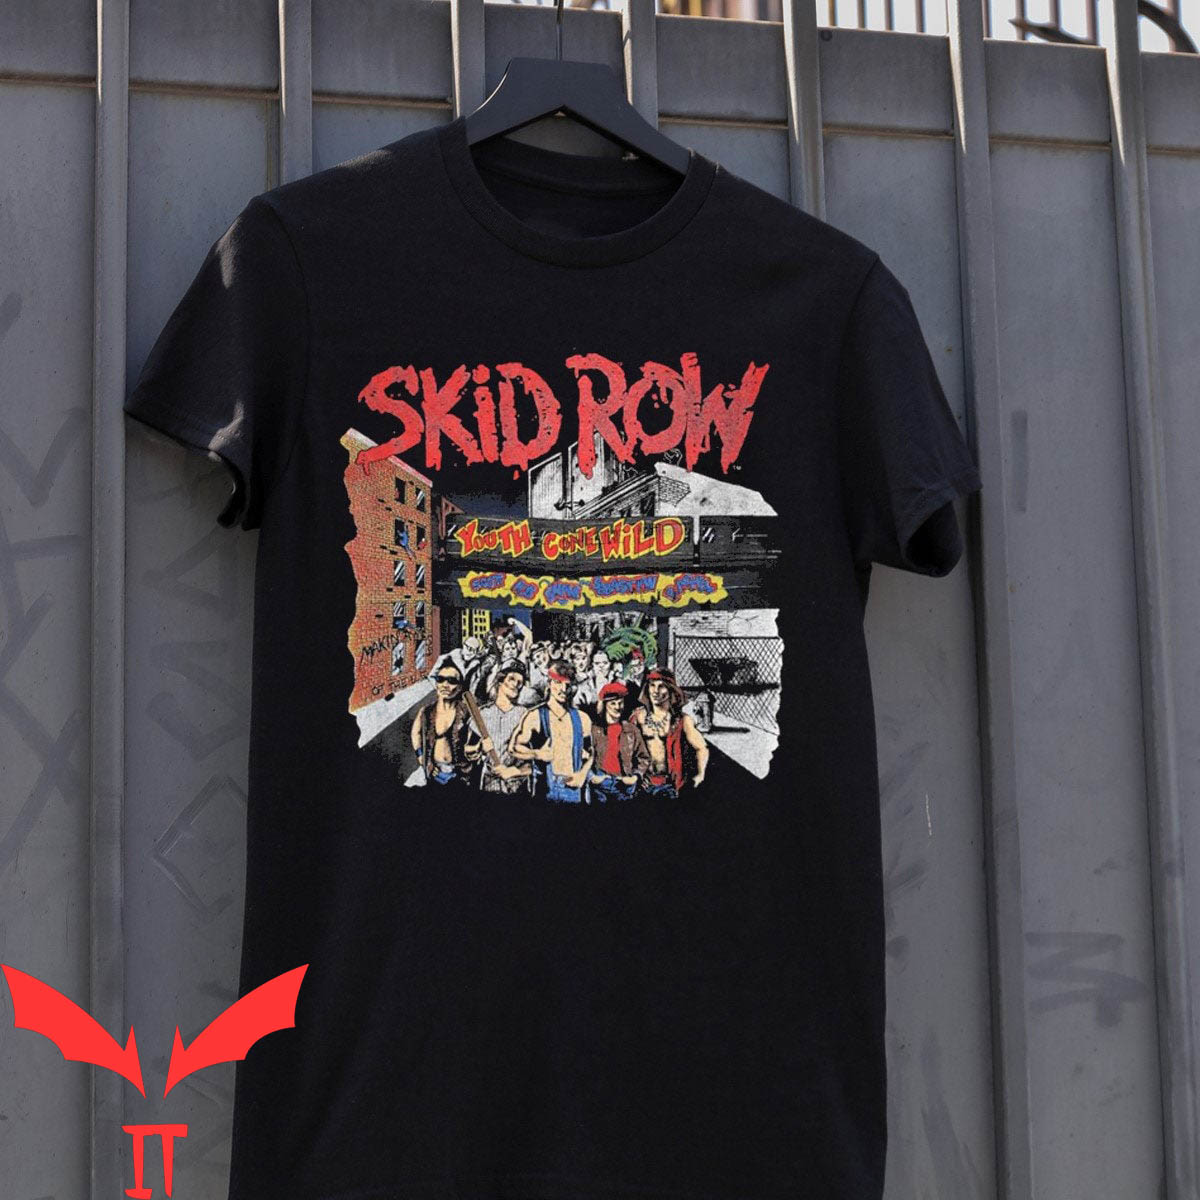 Skid Row T-Shirt Vintage 1989 Youth Gone Wild Metal Music